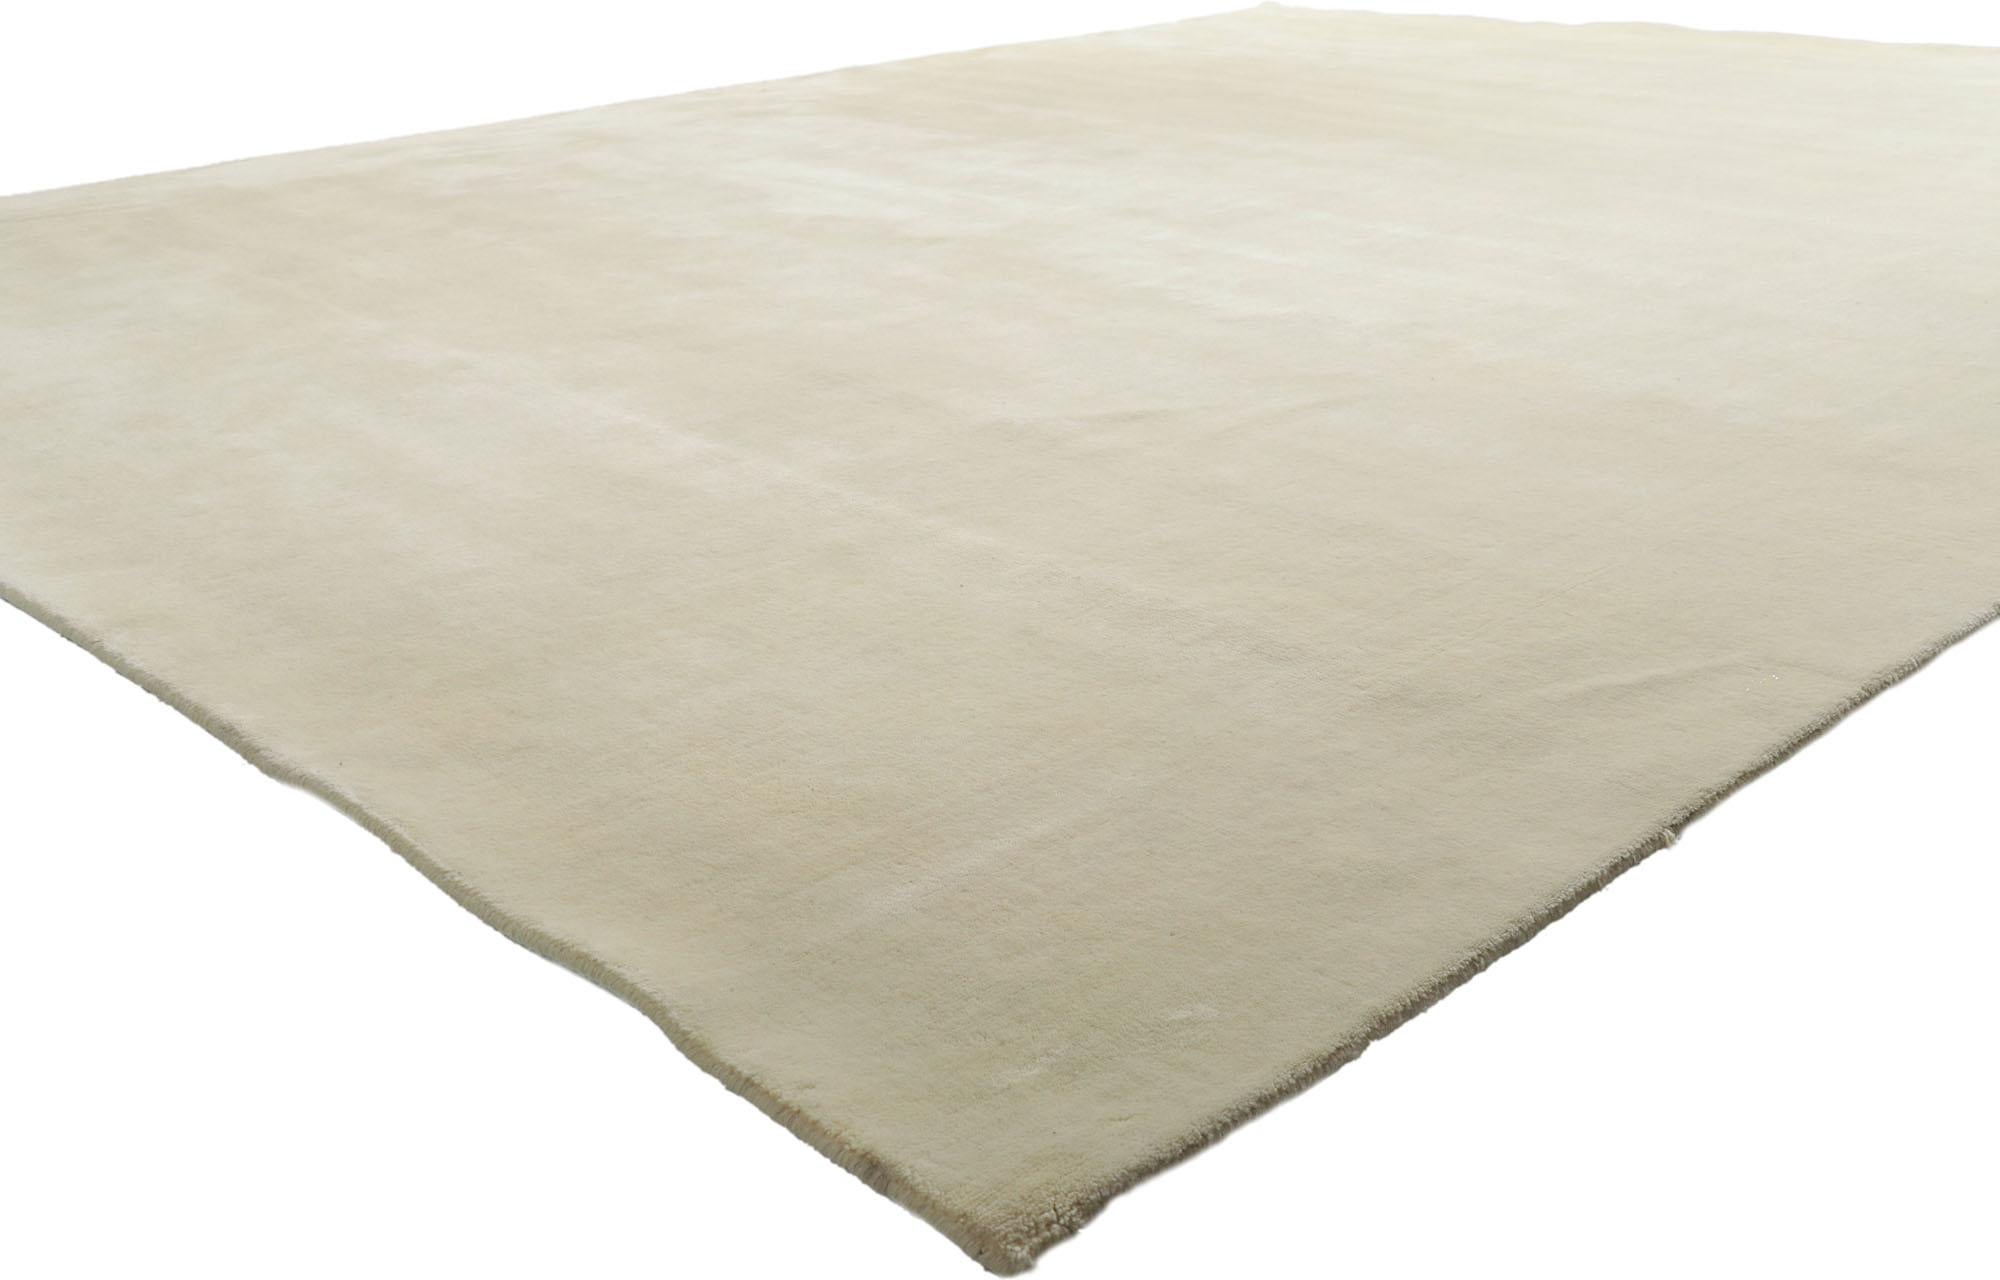 30749 New Contemporary Ivory Area Rug with Minimalist Style, 10'00 x 12'10. Submerged in the captivating realm of contemporary allure and nuanced minimalism, this impeccably crafted wool rug gracefully unfolds from the adept looms of modern India.